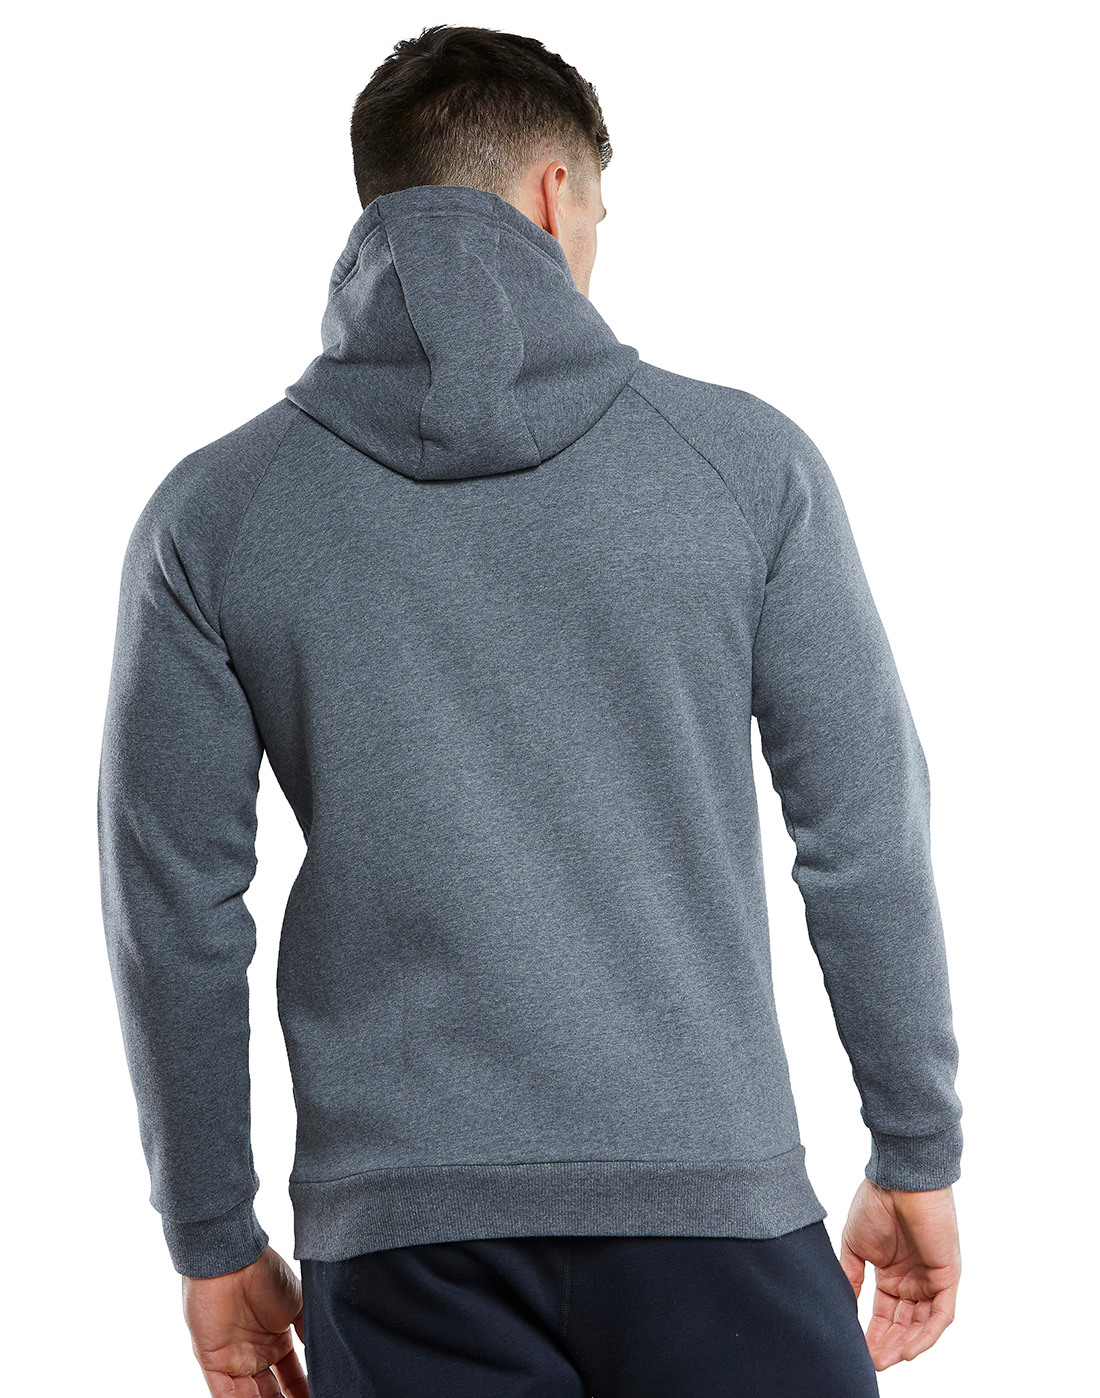 Under Armour Mens Rival Fleece Hoodie - Grey | Life Style Sports IE